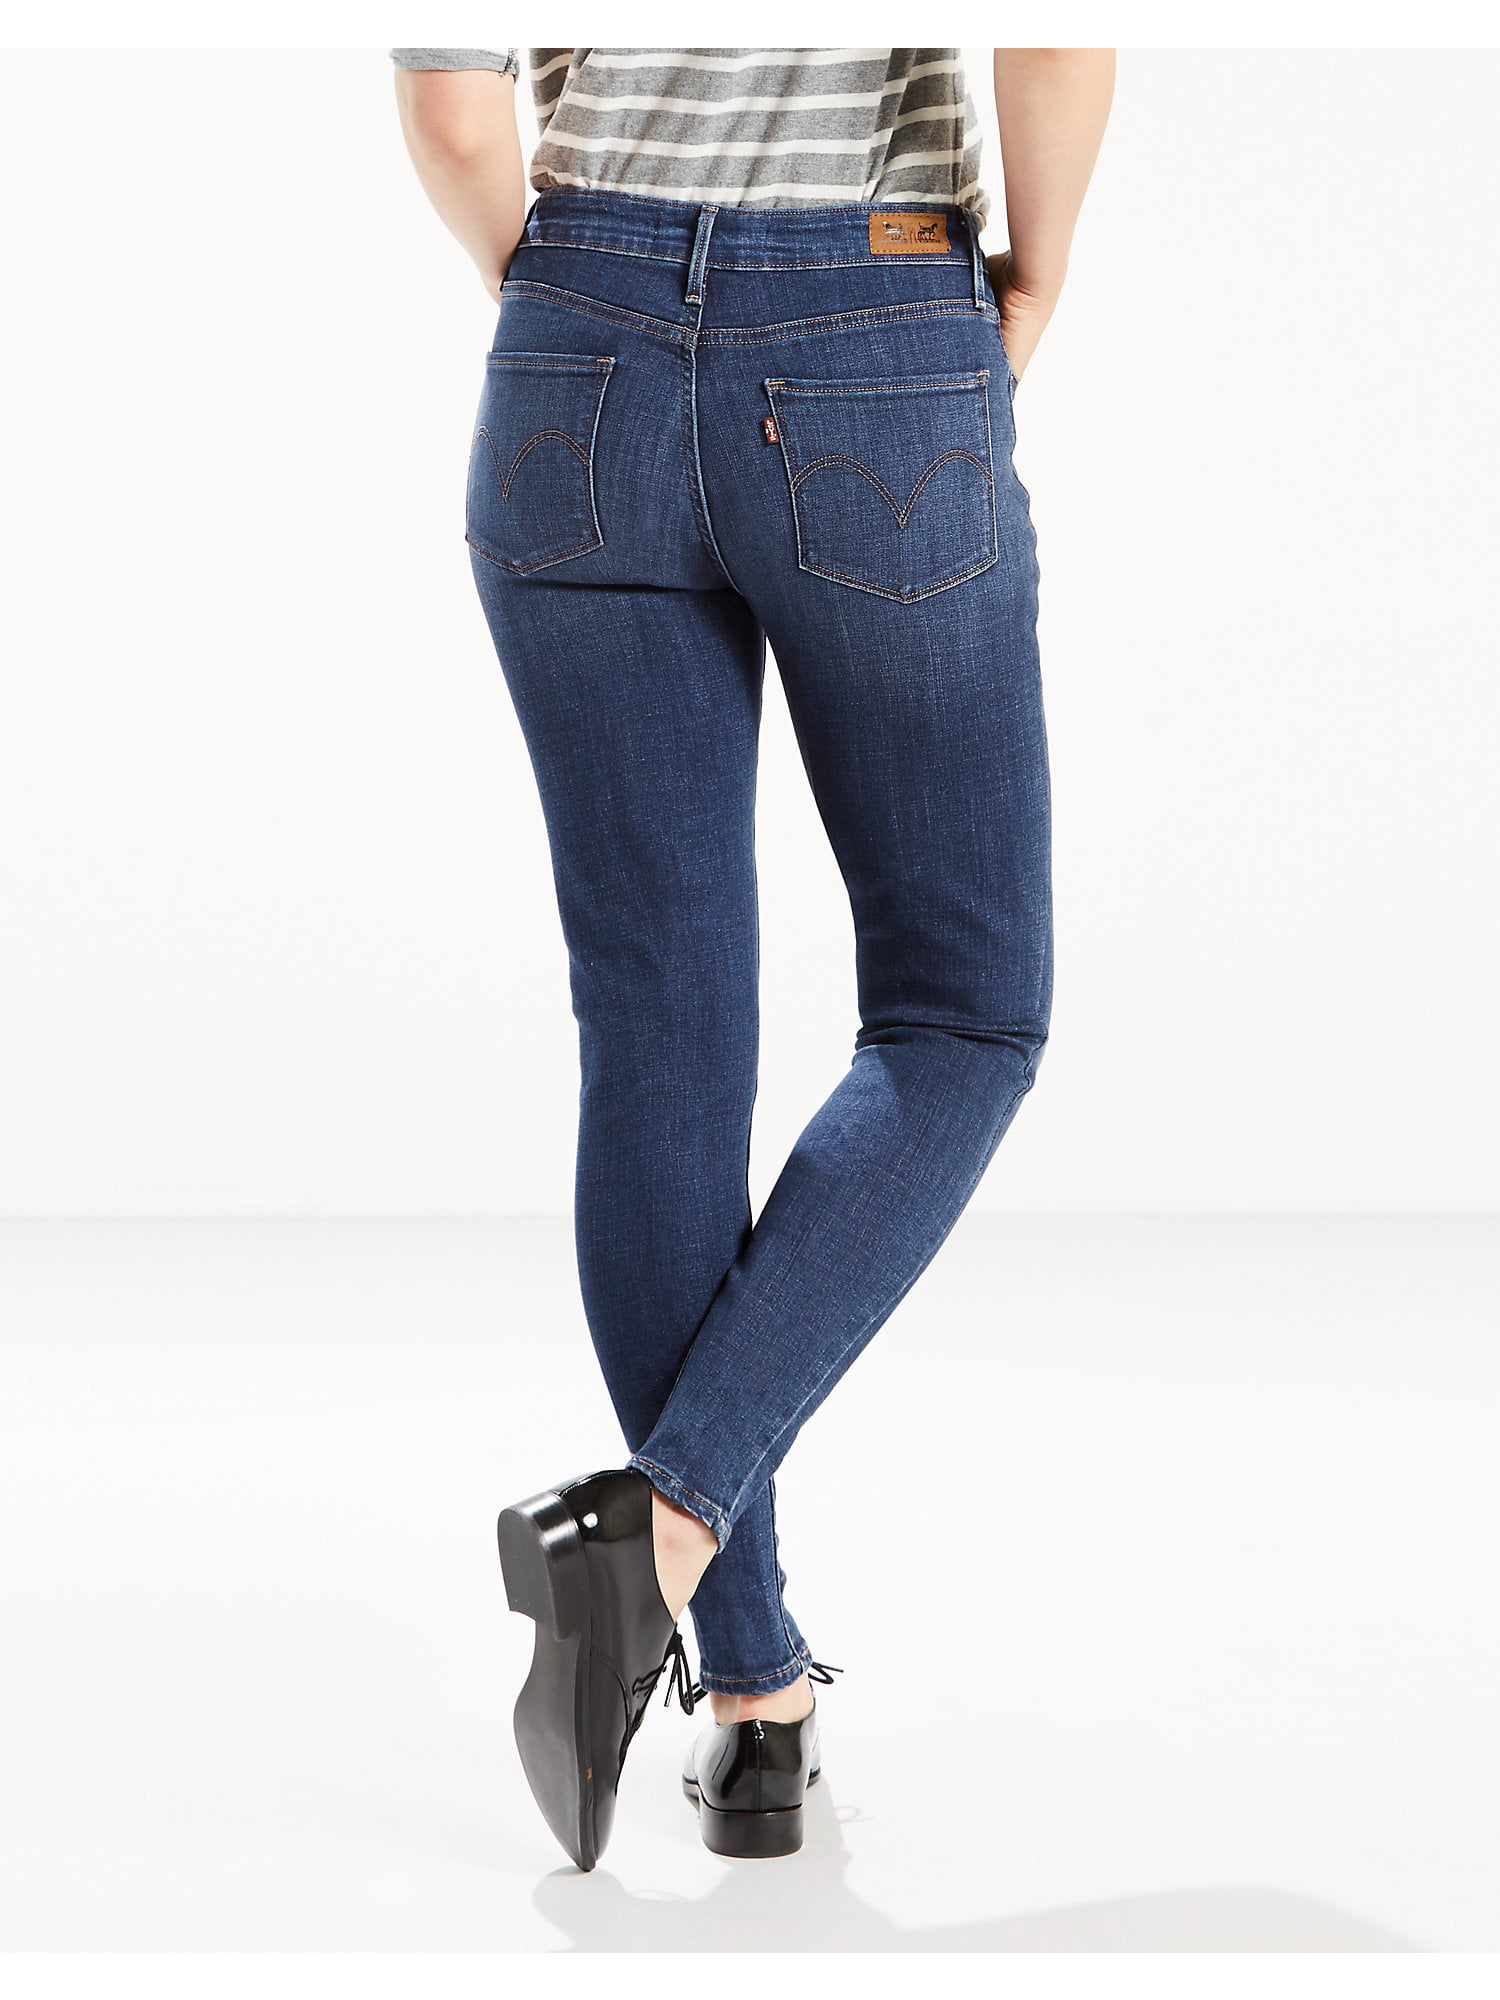 Details about   New Levi's Plus Mid-Rise Skinny Jeans Pant Lighting Trail Grey Women 24 22 20 18 